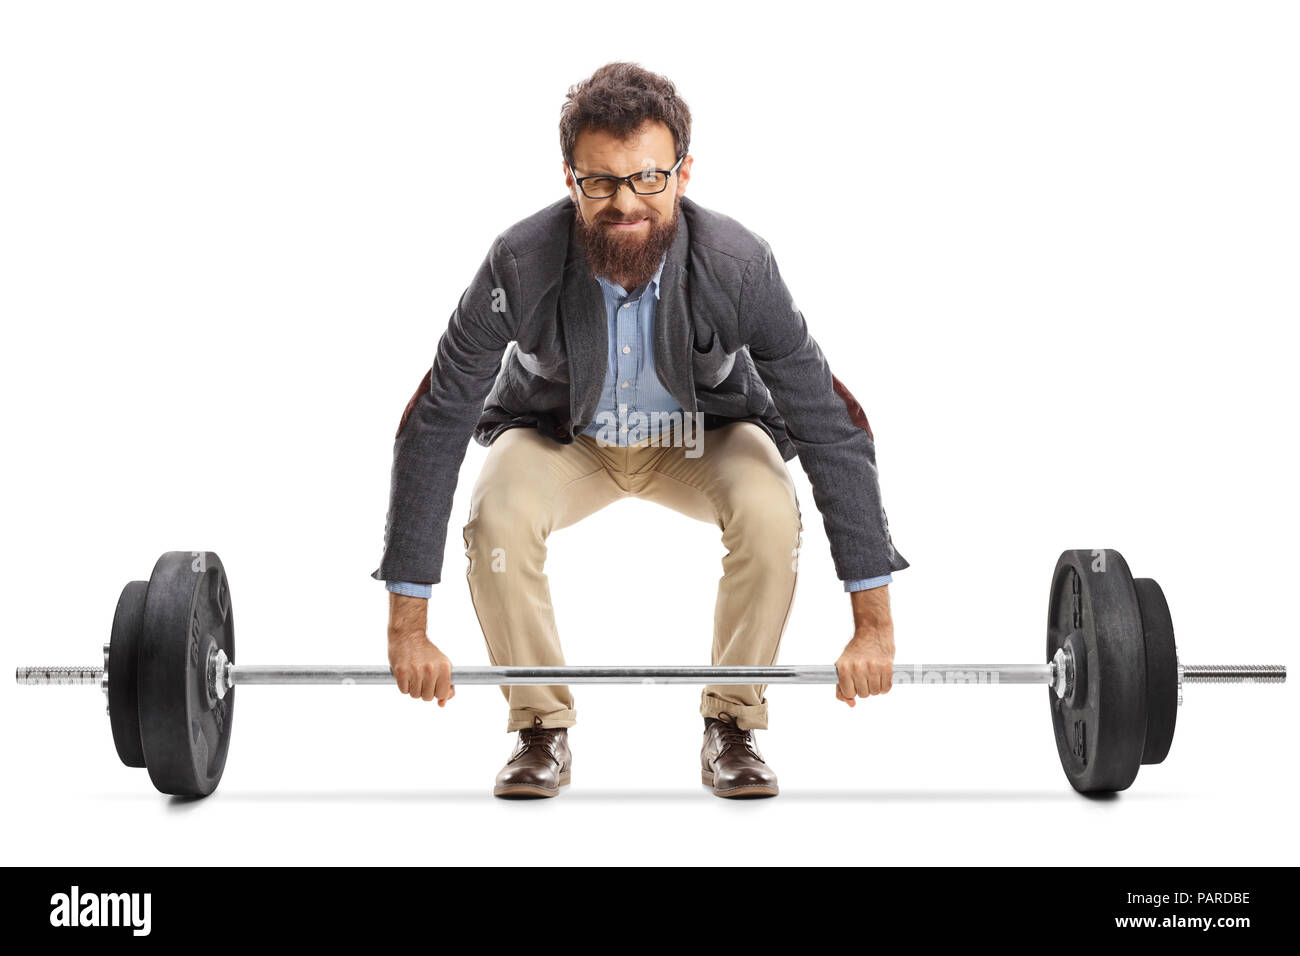 Young man struggling to lift a barbell isolated on white background Stock Photo